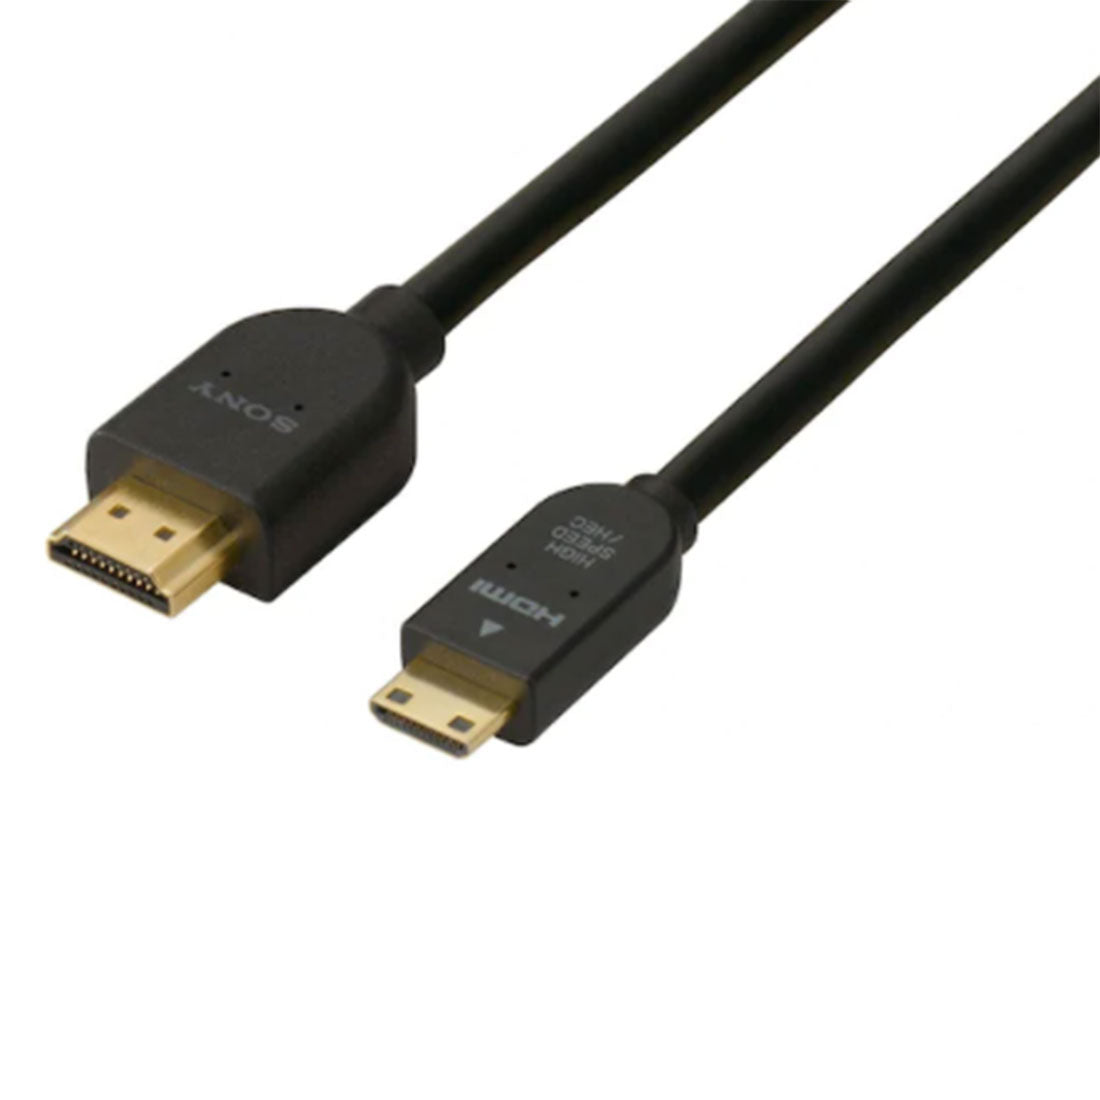 Sony DLCHEM15 1.5m Mini HDMI Cable - Clearance